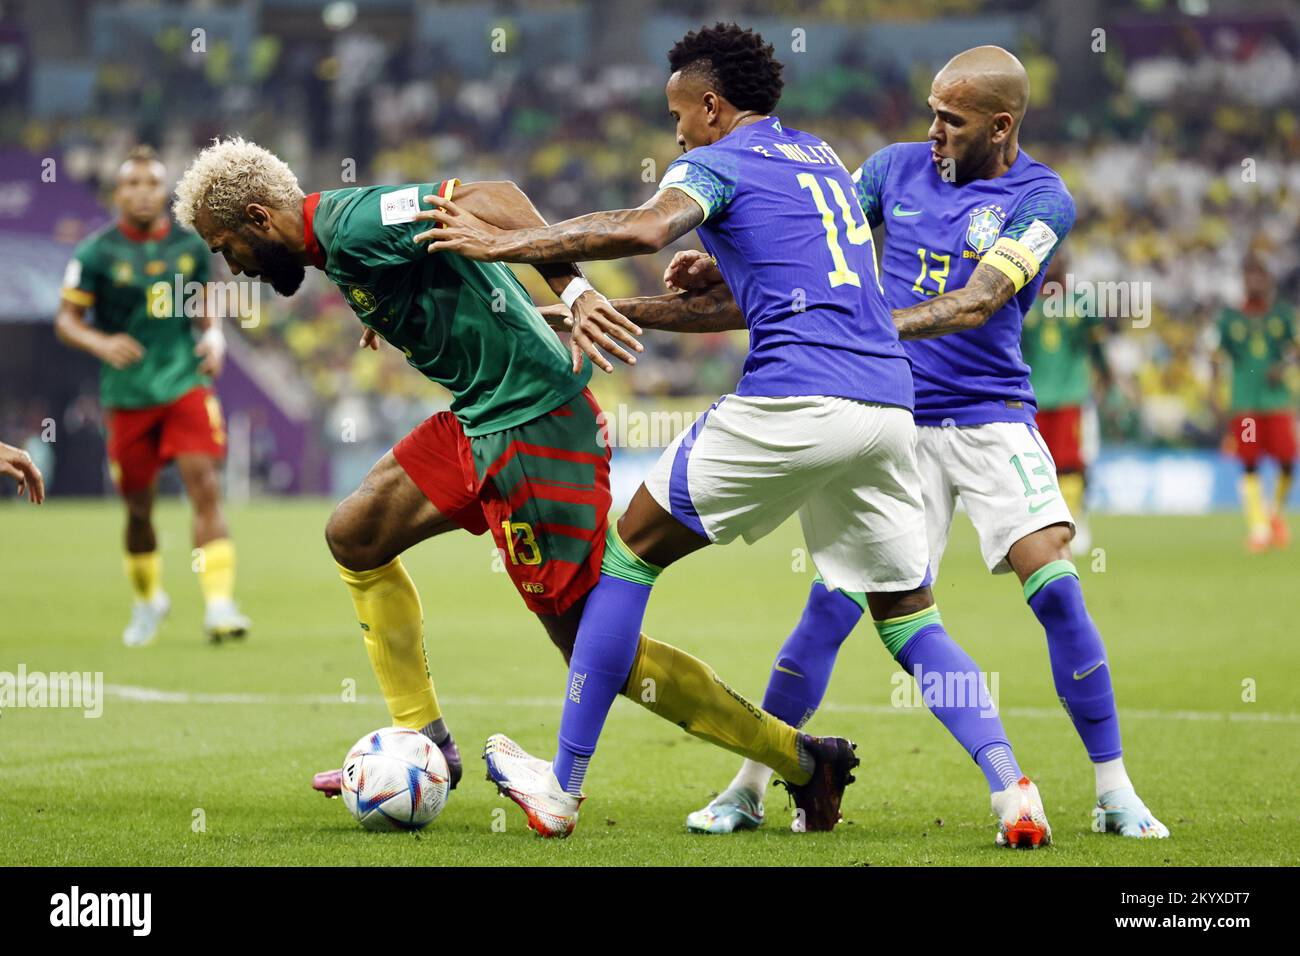 Qatar. 02nd Dec, 2022. LUSAIL CITY - (l-r) Eric Maxim Choupo-Moting of Cameroon, Eder Militao of Brazil, Dani Alves of Brazil during the FIFA World Cup Qatar 2022 group G match between Cameroon and Brazil at Lusail Stadium on December 2, 2022 in Lusail City, Qatar . AP | Dutch Height | MAURICE OF STONE Credit: ANP/Alamy Live News Stock Photo